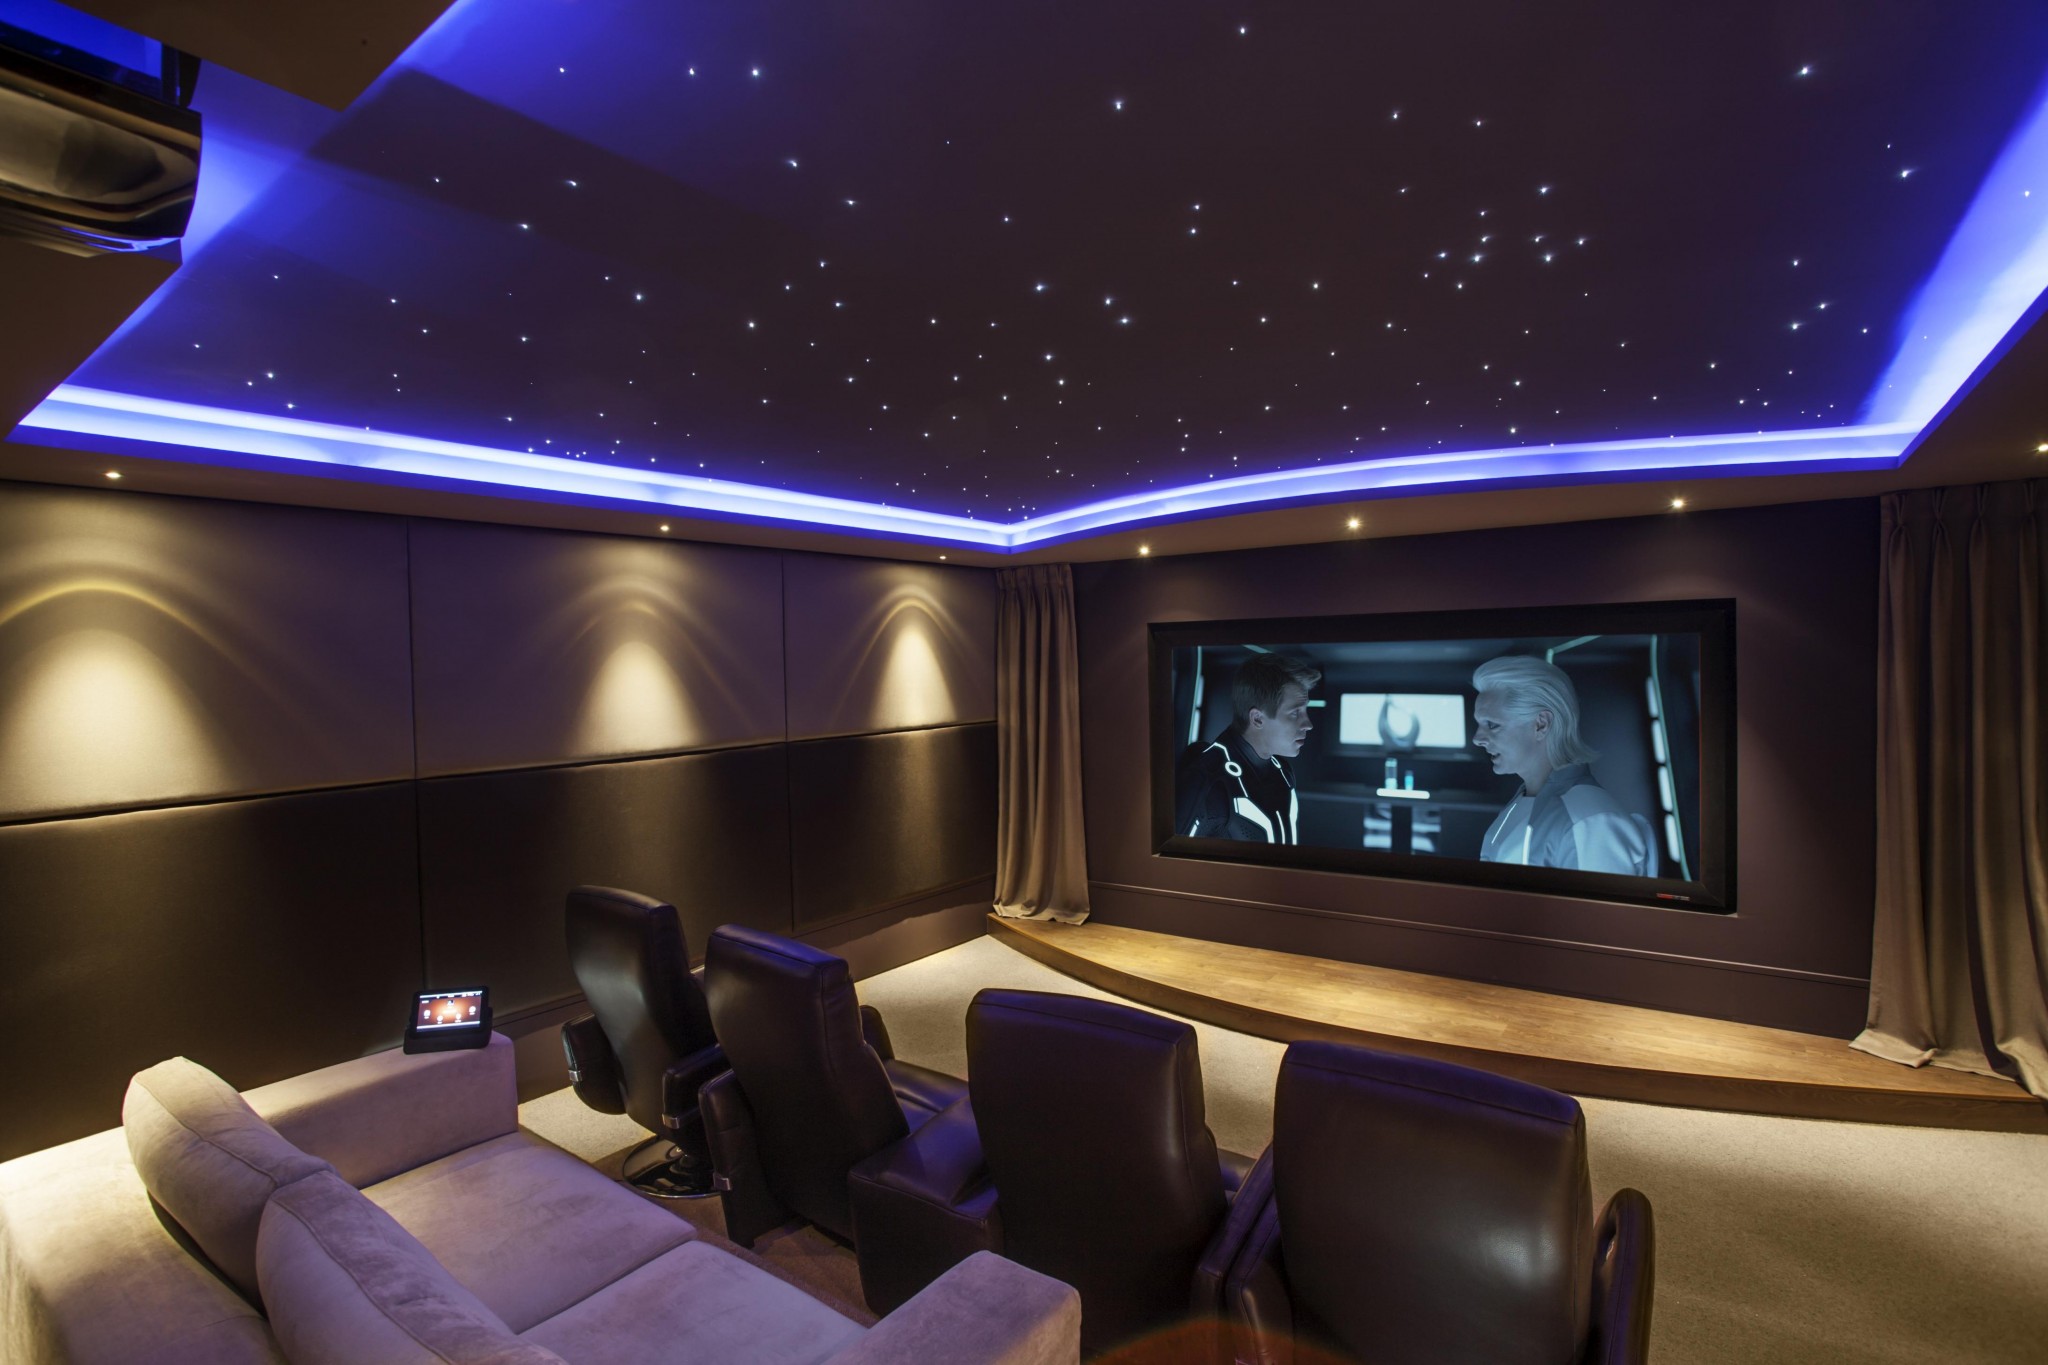 Home Theater Room Design: Bring The Magic Of Movies To Your Home